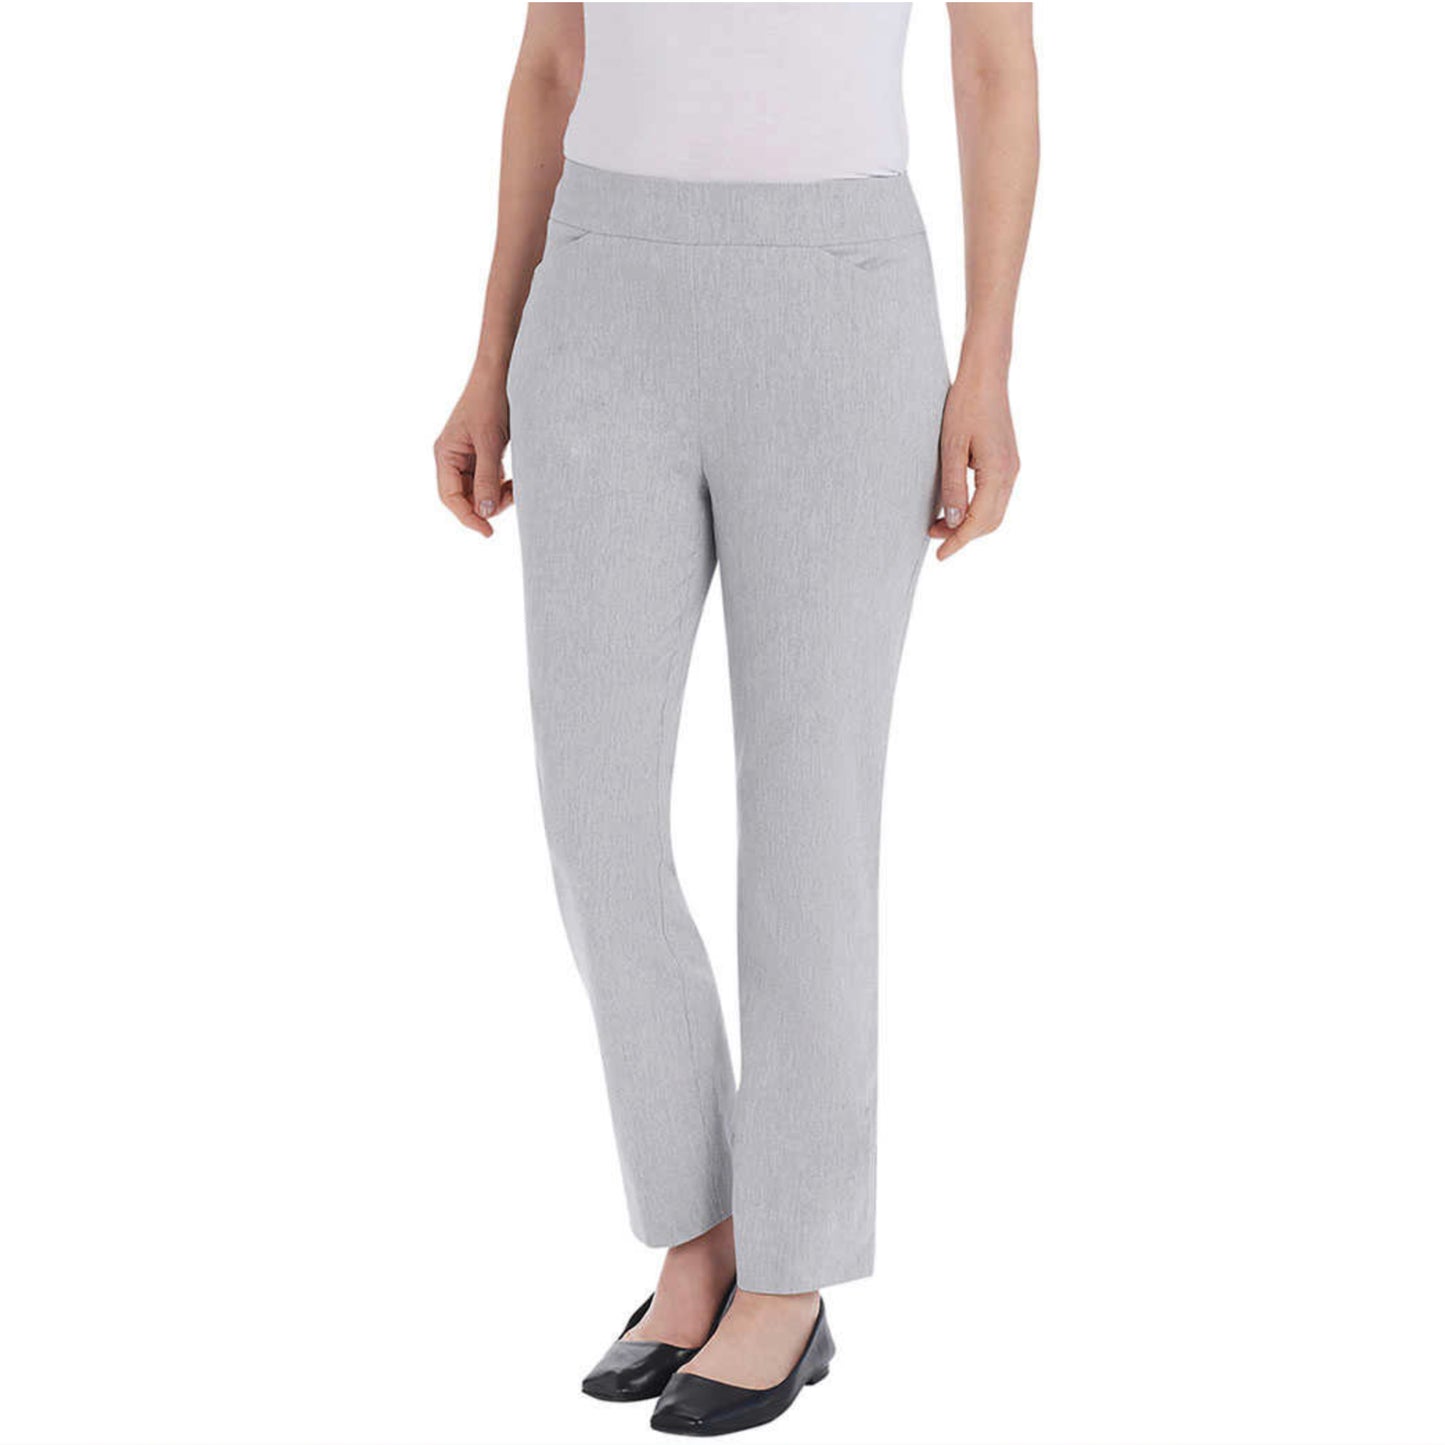 Hilary Radley Ladies' Pull On Ankle 26in Inseam Tummy Control Pants, H52